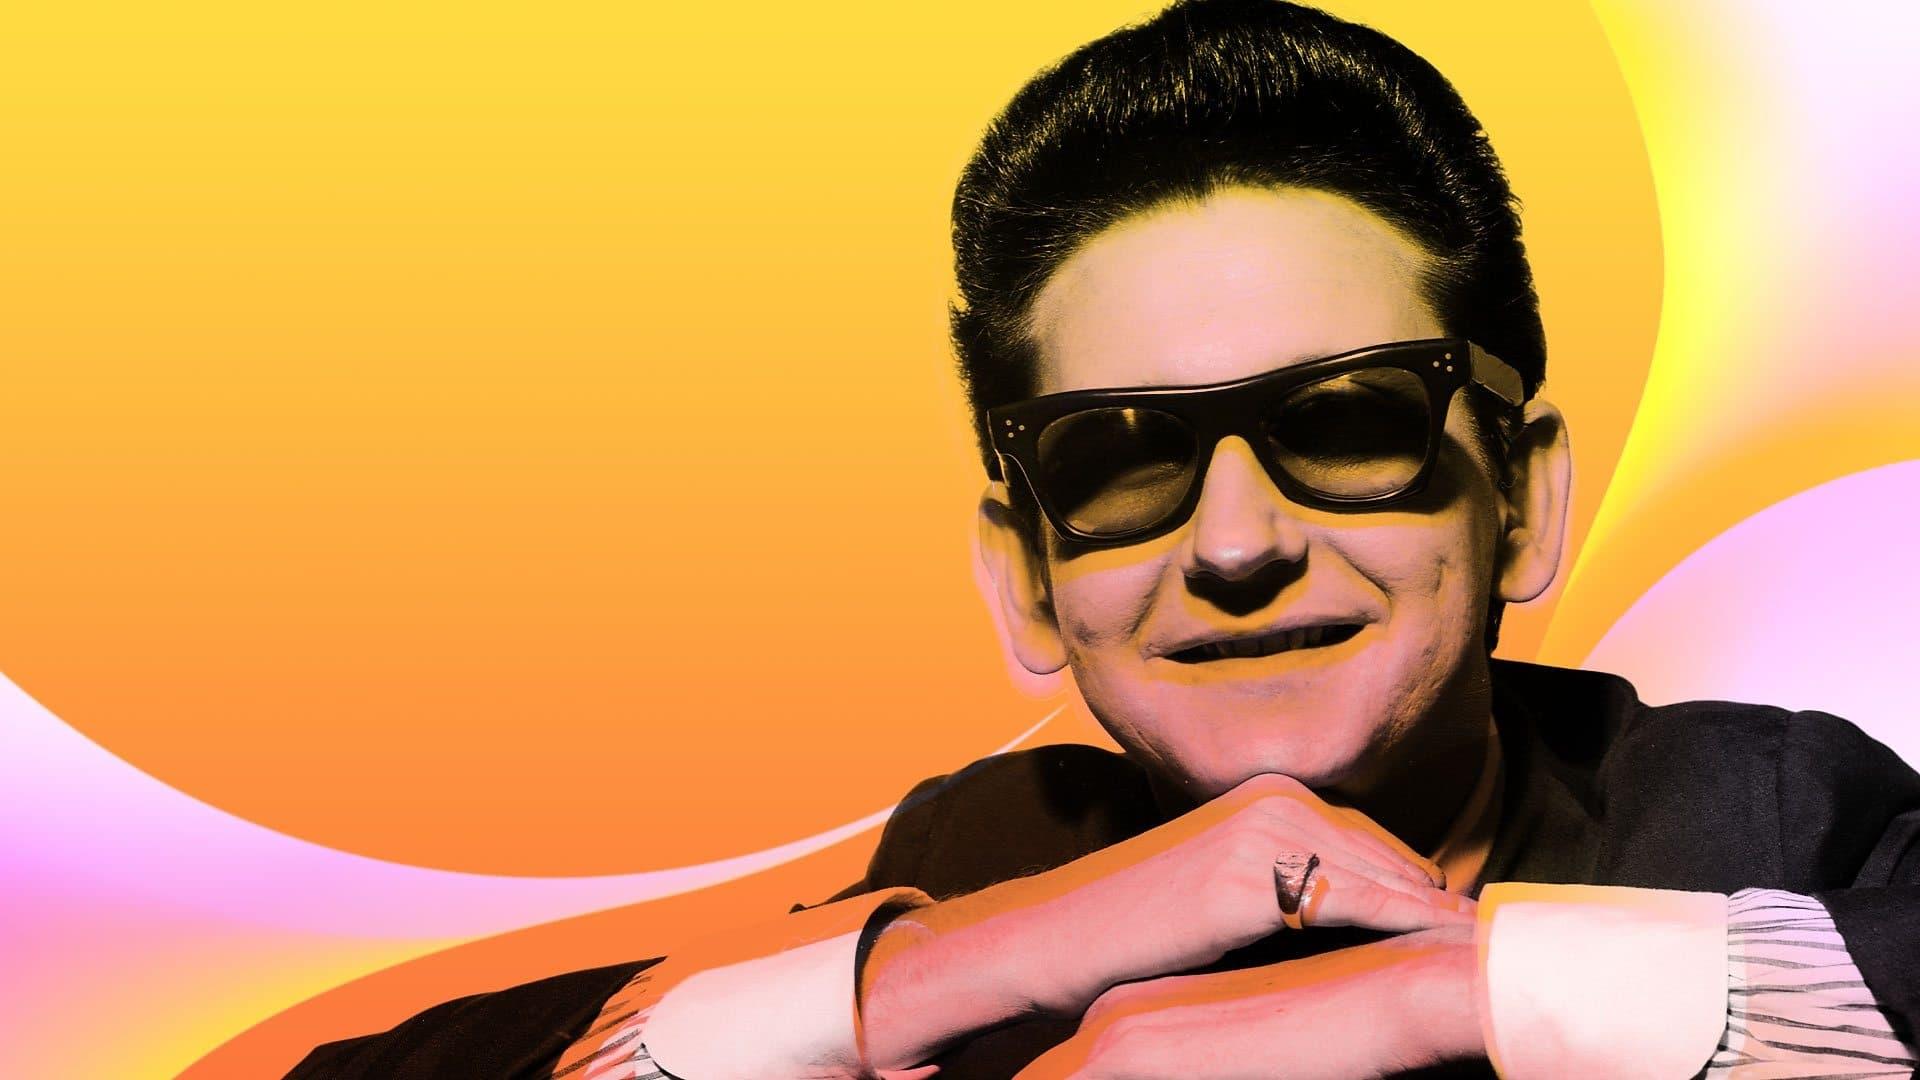 Roy Orbison At The BBC backdrop